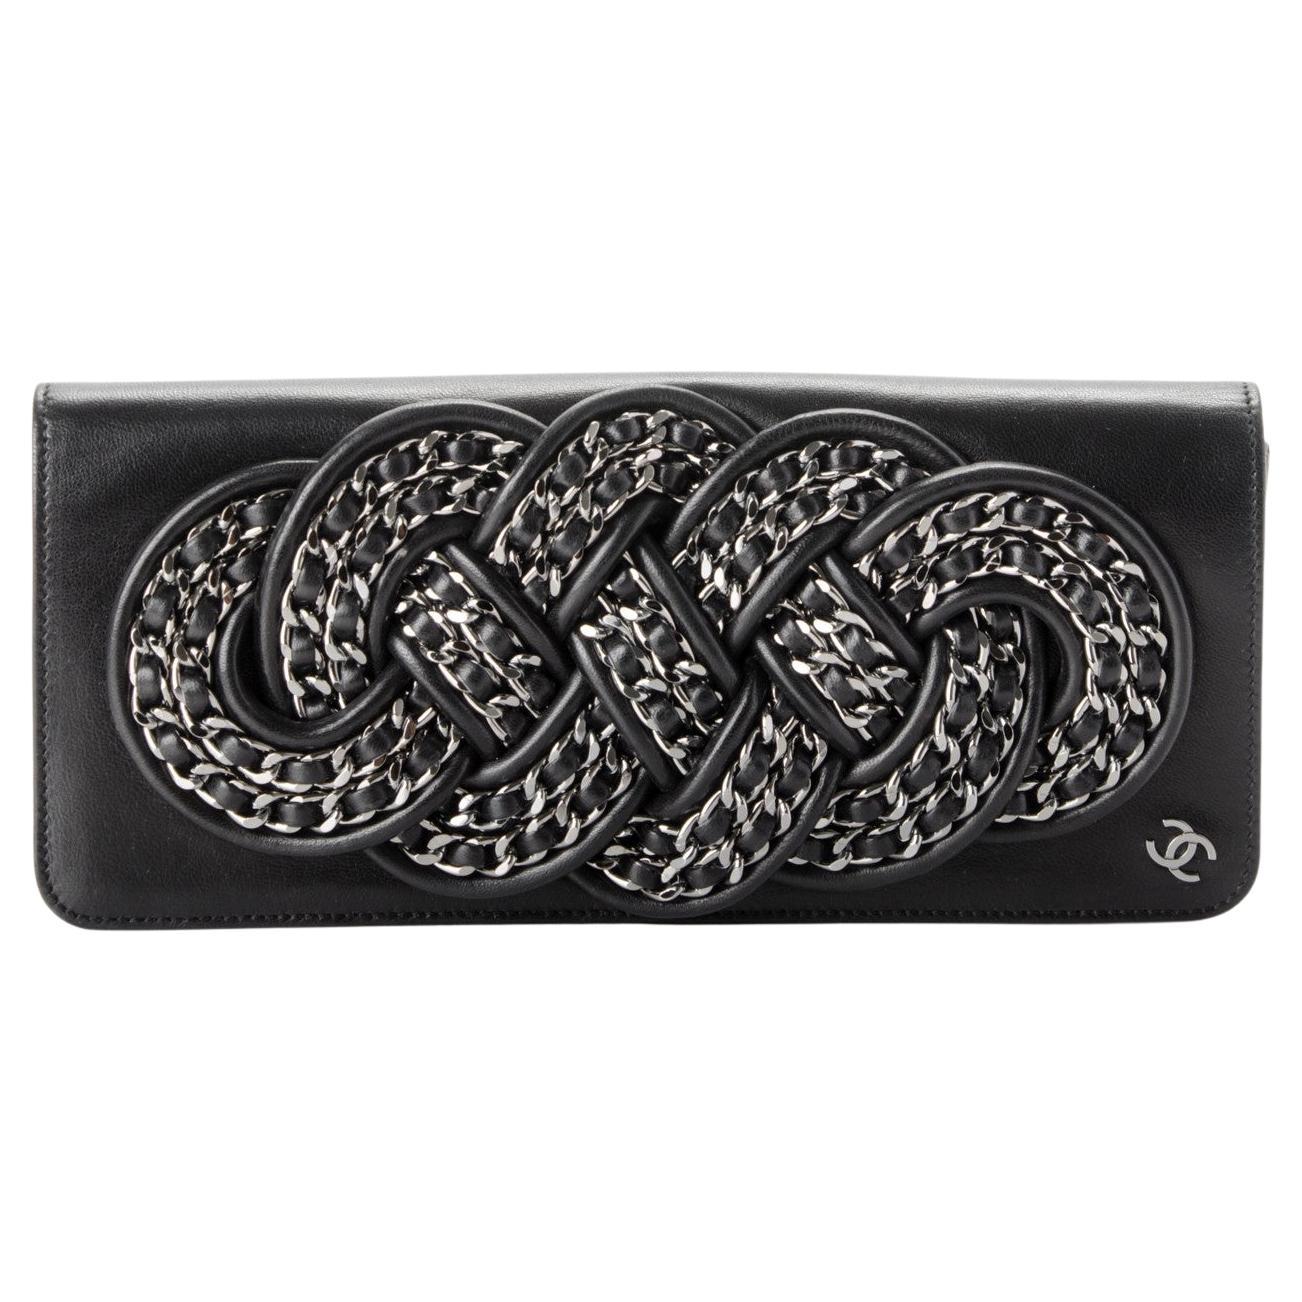 Chanel 2008 Iconic Twisted Silver Chain Knotted Lambskin Gala Evening Clutch Bag For Sale